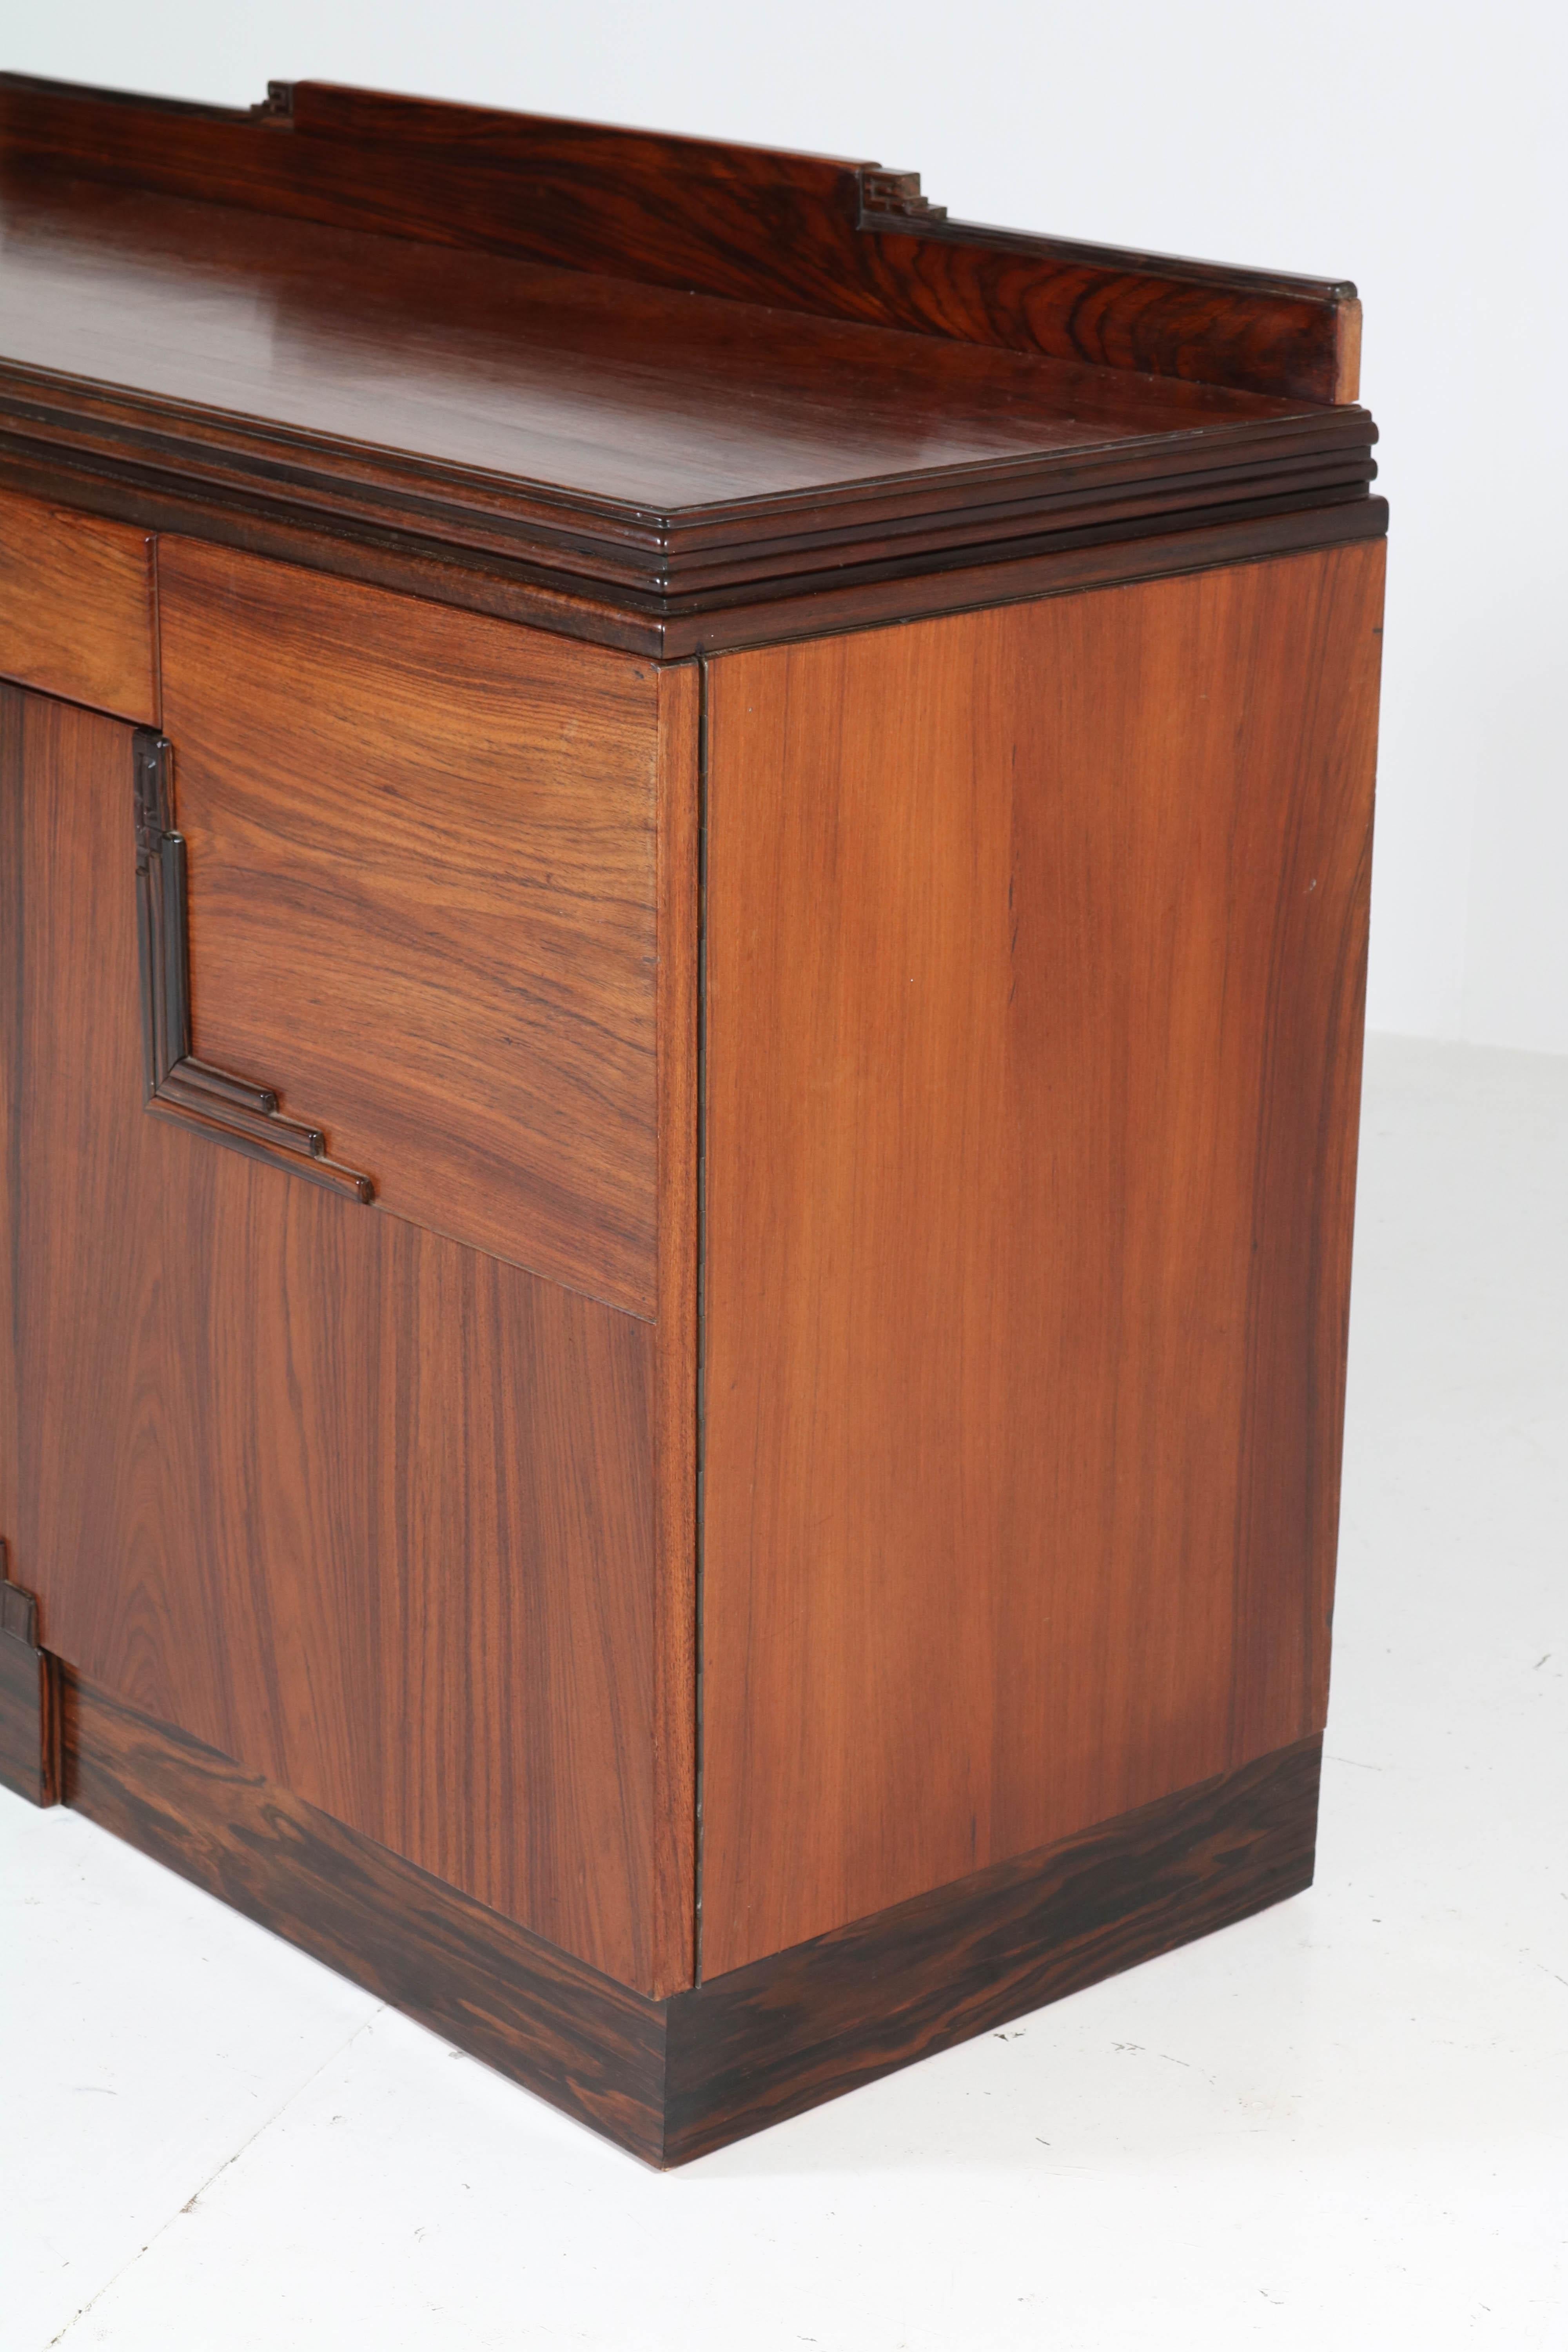 Rosewood Art Deco Amsterdam School Credenza or Sideboard by Fa. Drilling, 1920s 6